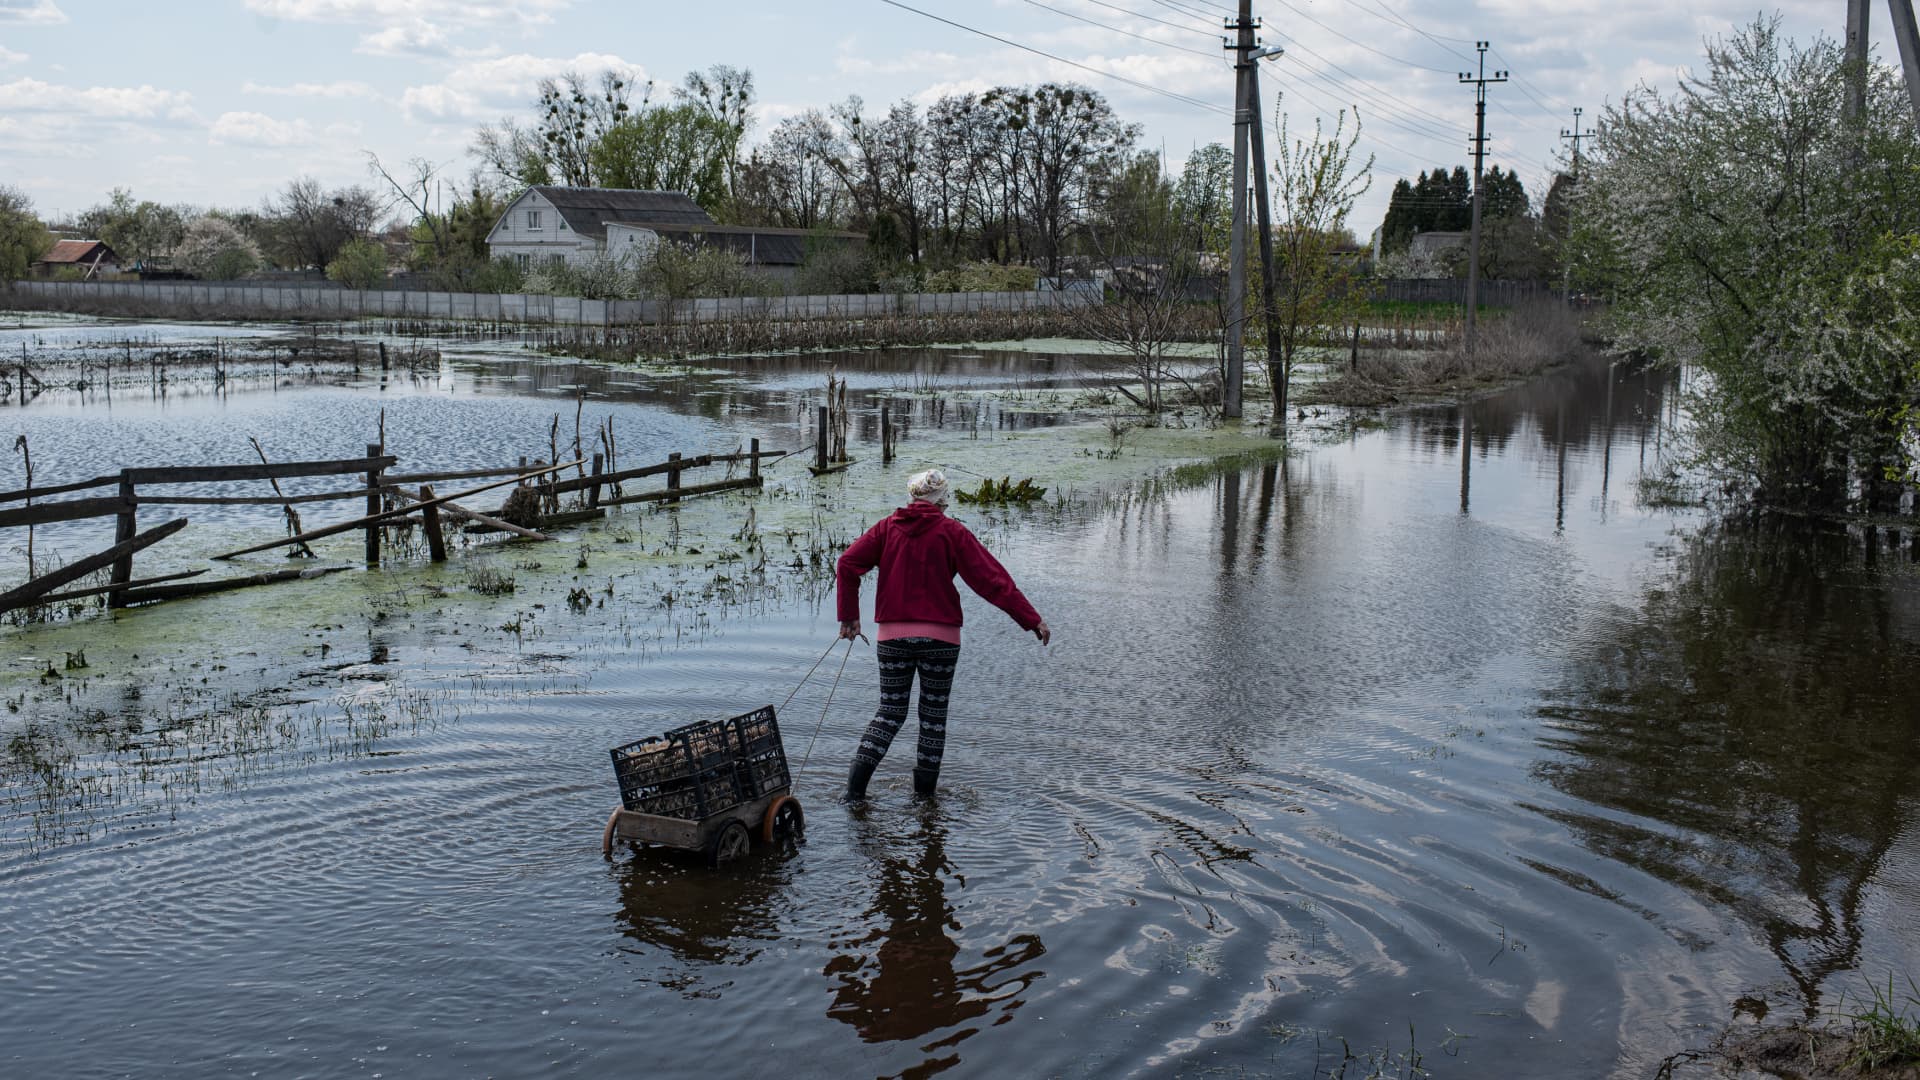 Nadiia pulls a cart with crates filled with potatoes through a flooded street, on May 2, 2022 in Demydiv, Ukraine.